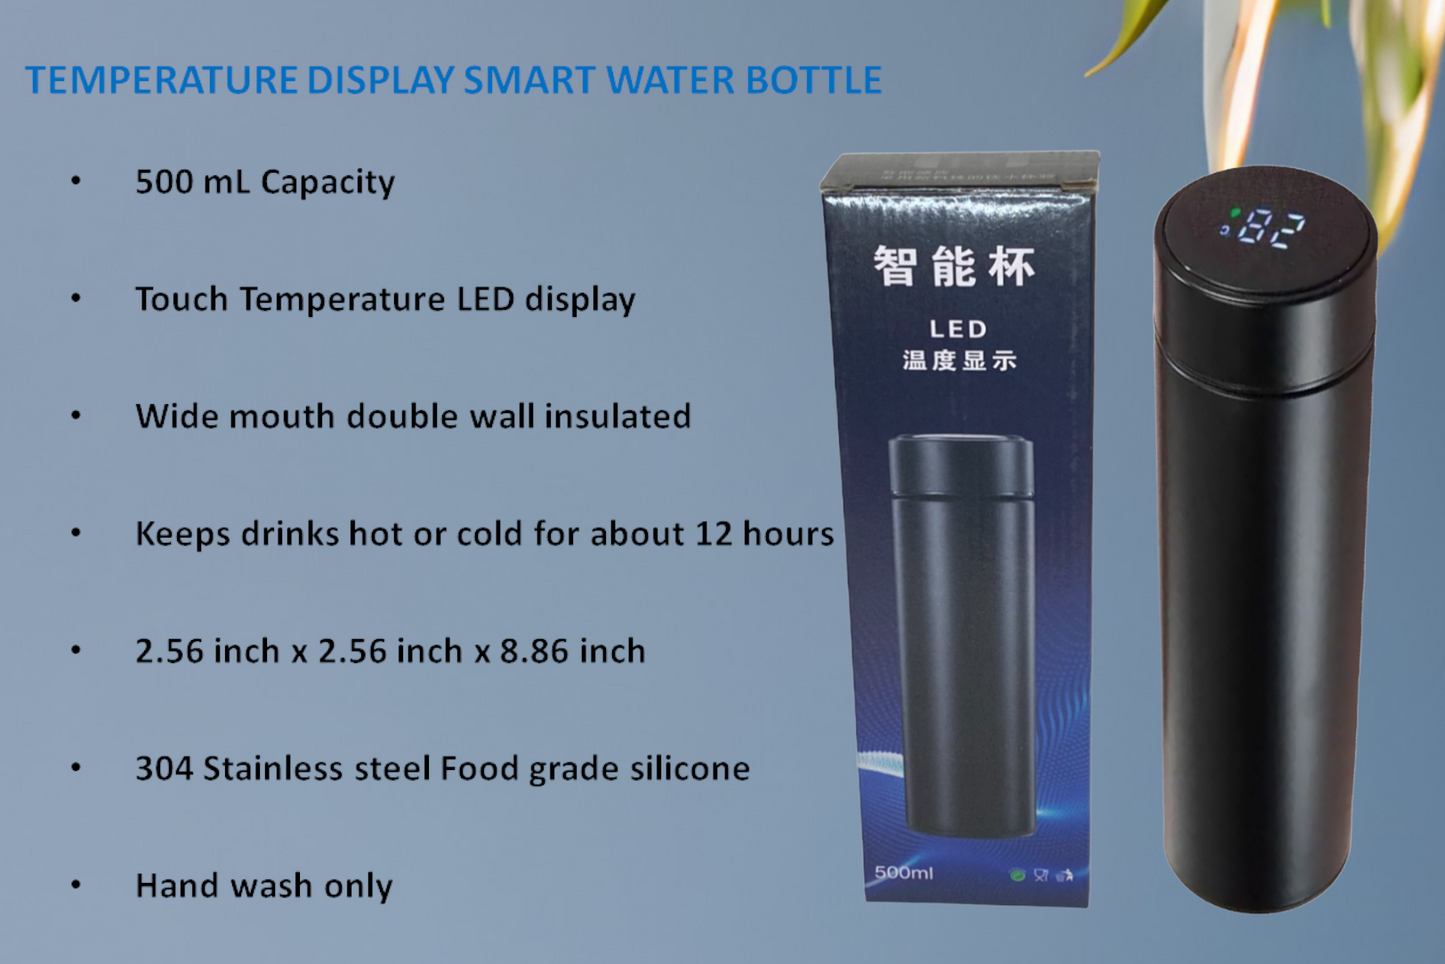 KD Double Wall Vacuum Flask, LED Temperature Display, 500 mL Stainless Steel Smart Water Bottle, Insulated, Coffee Mug, Tea Thermos